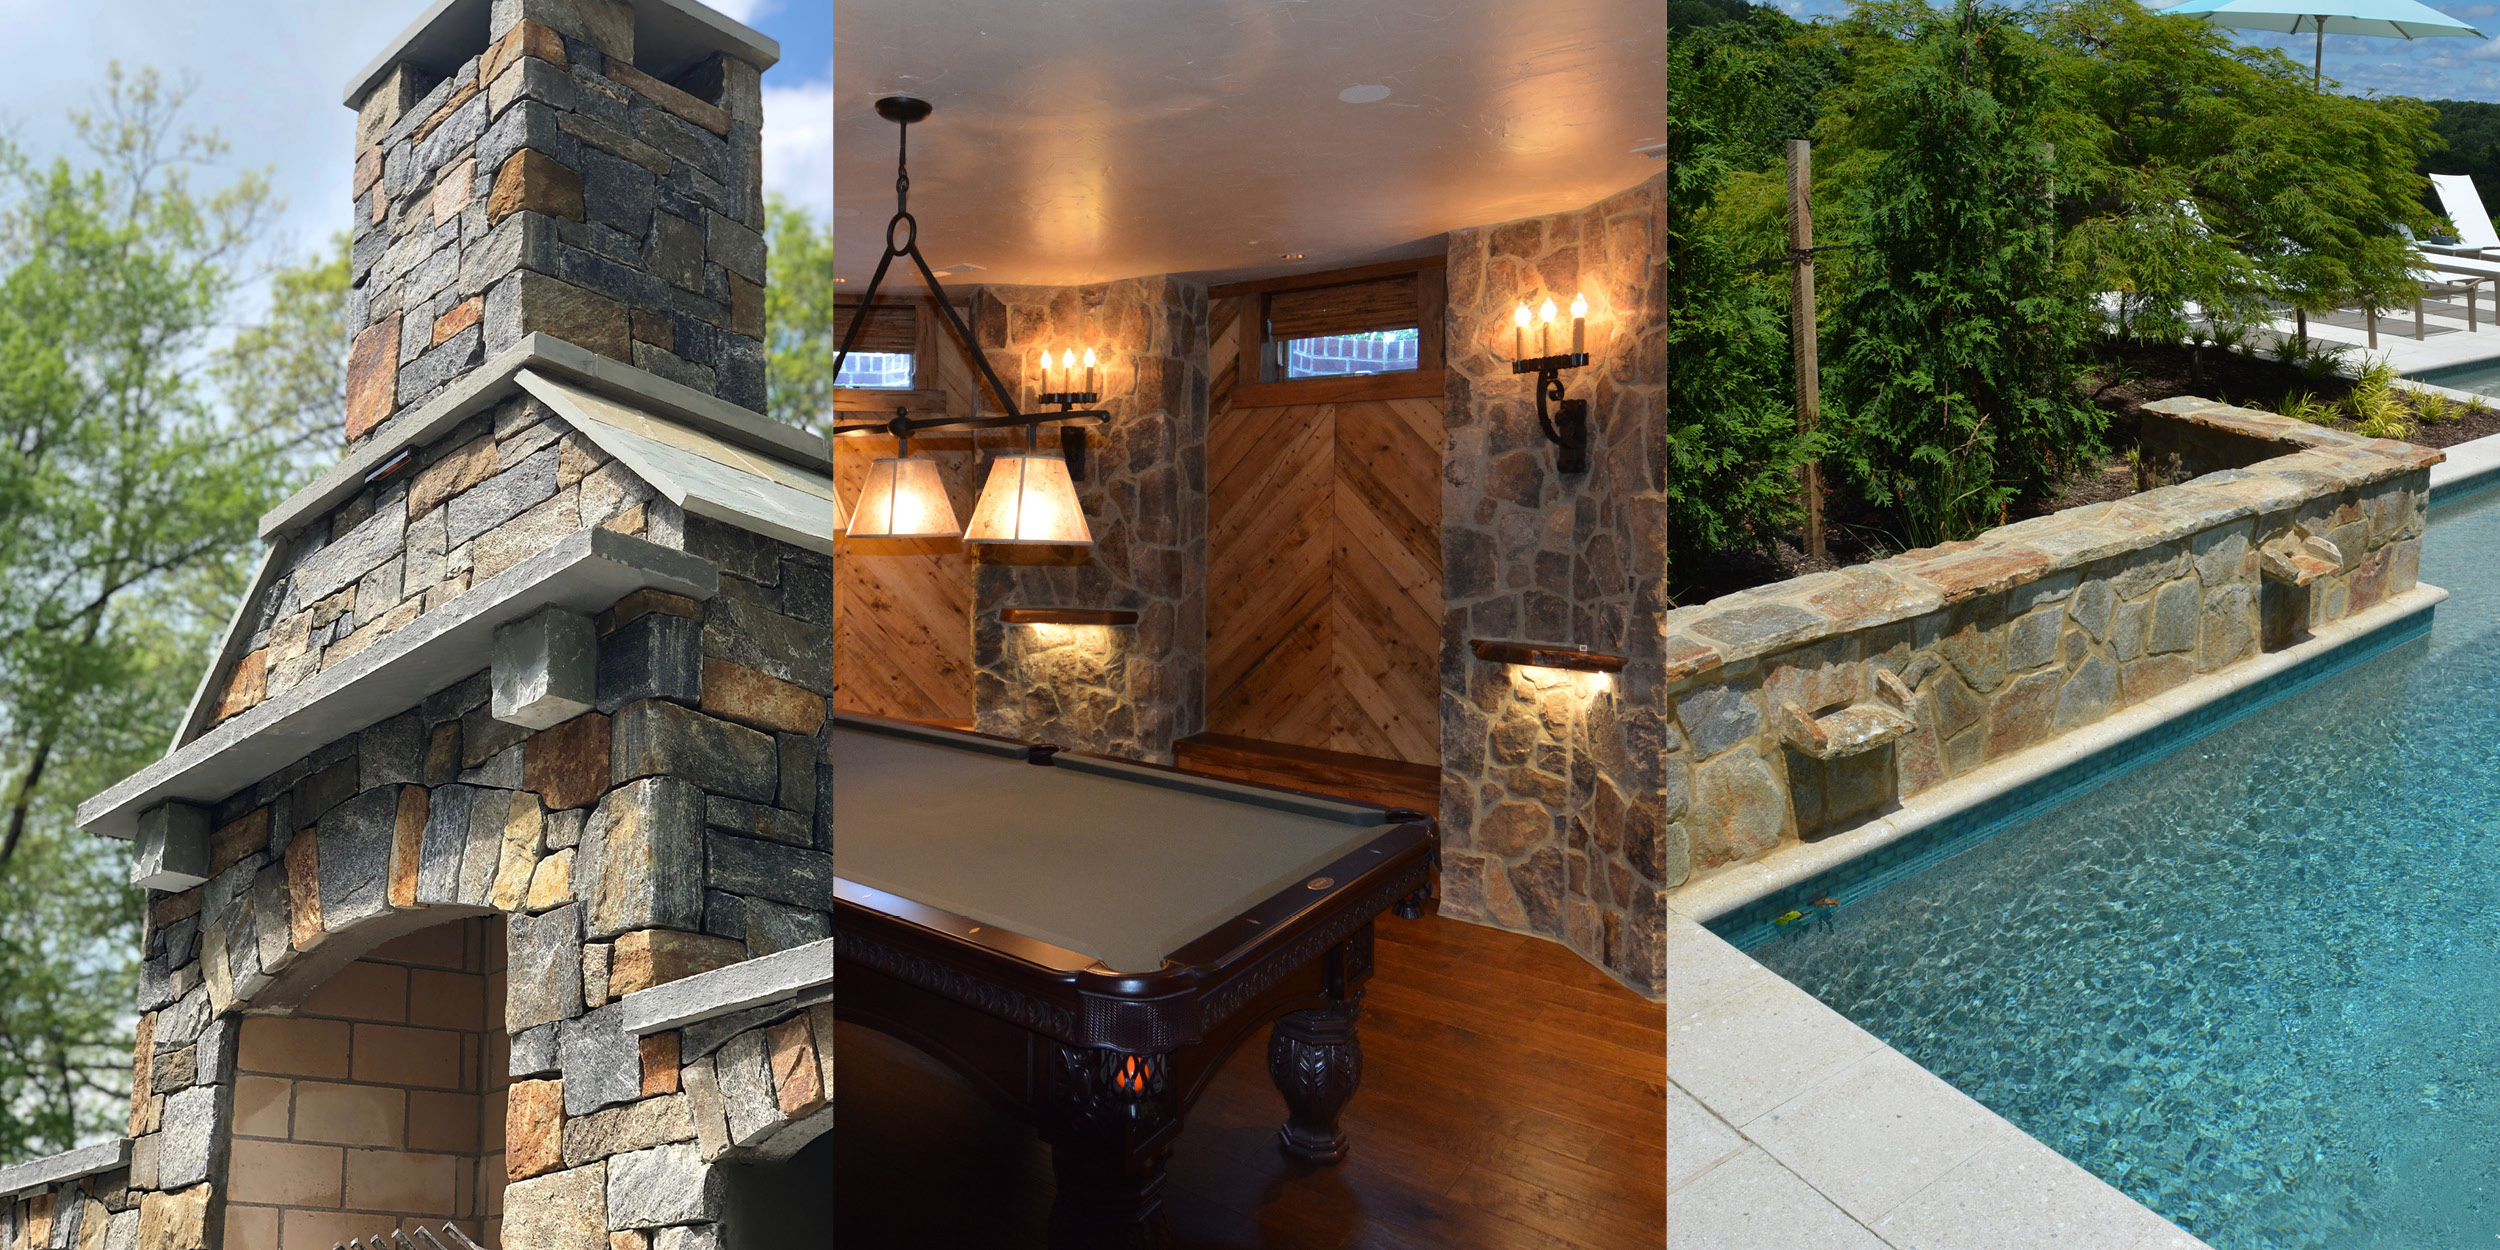 stone veneer project gallery, real stone veneer project inspiration, projects with sawn thin stone veneer